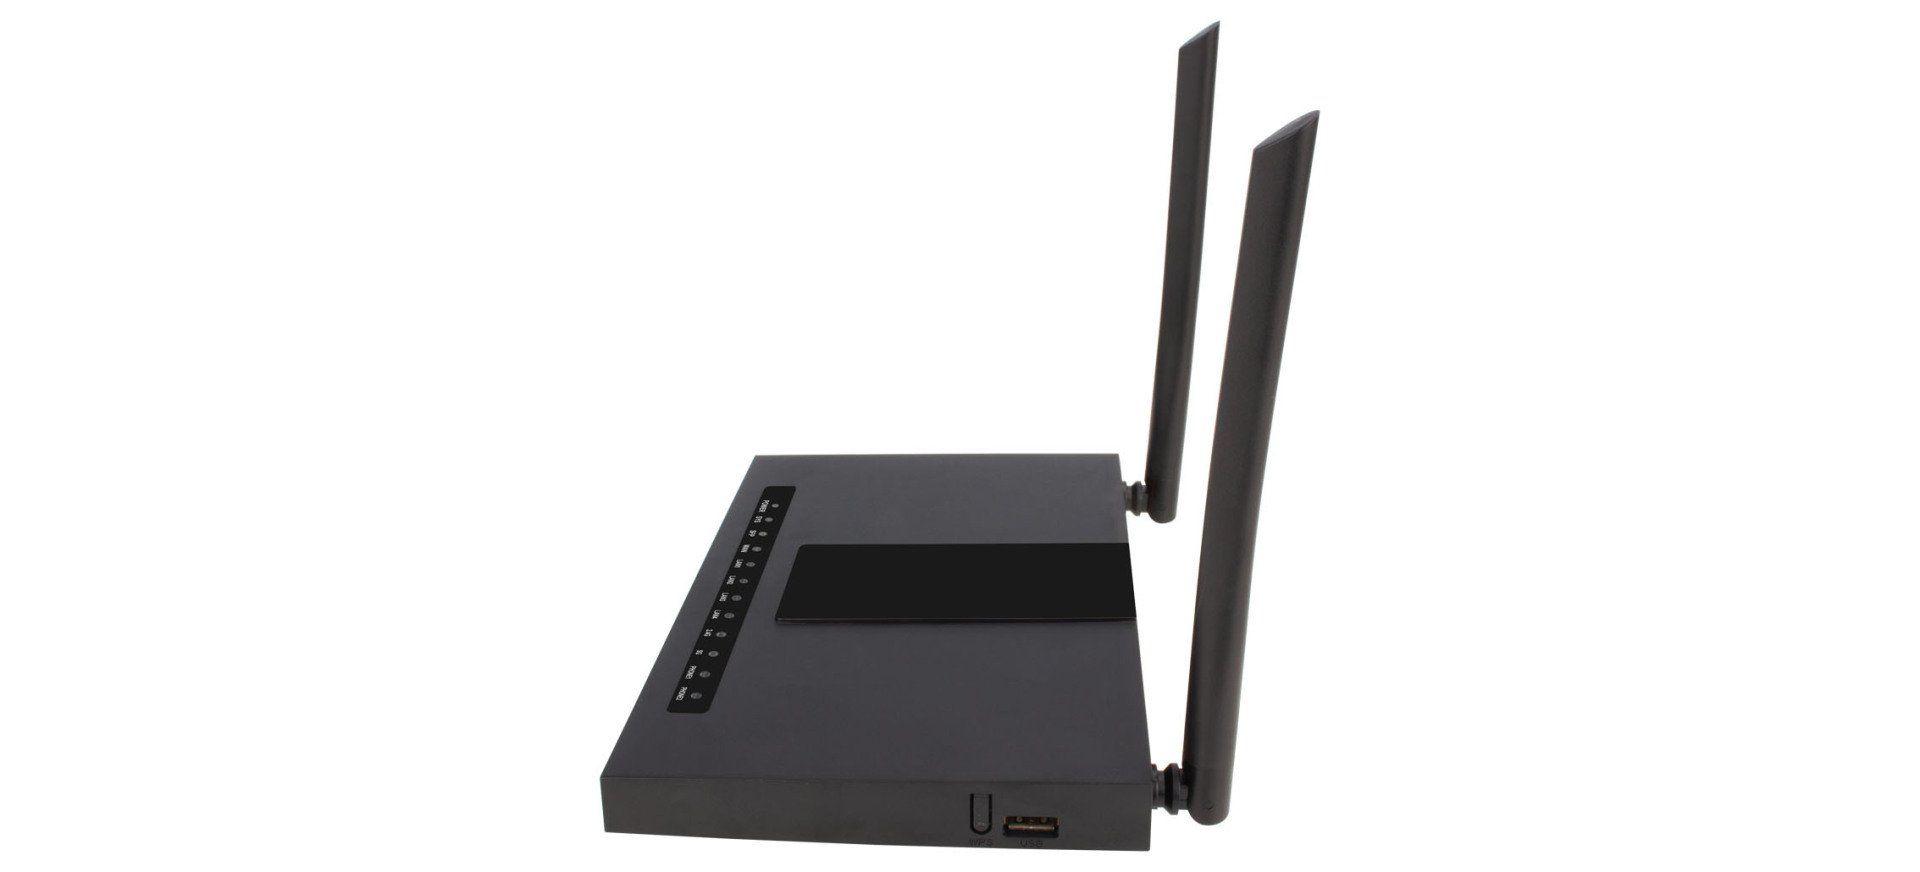 AC1100MSF Wireless AC VoIP Router with SFP Fiber Port